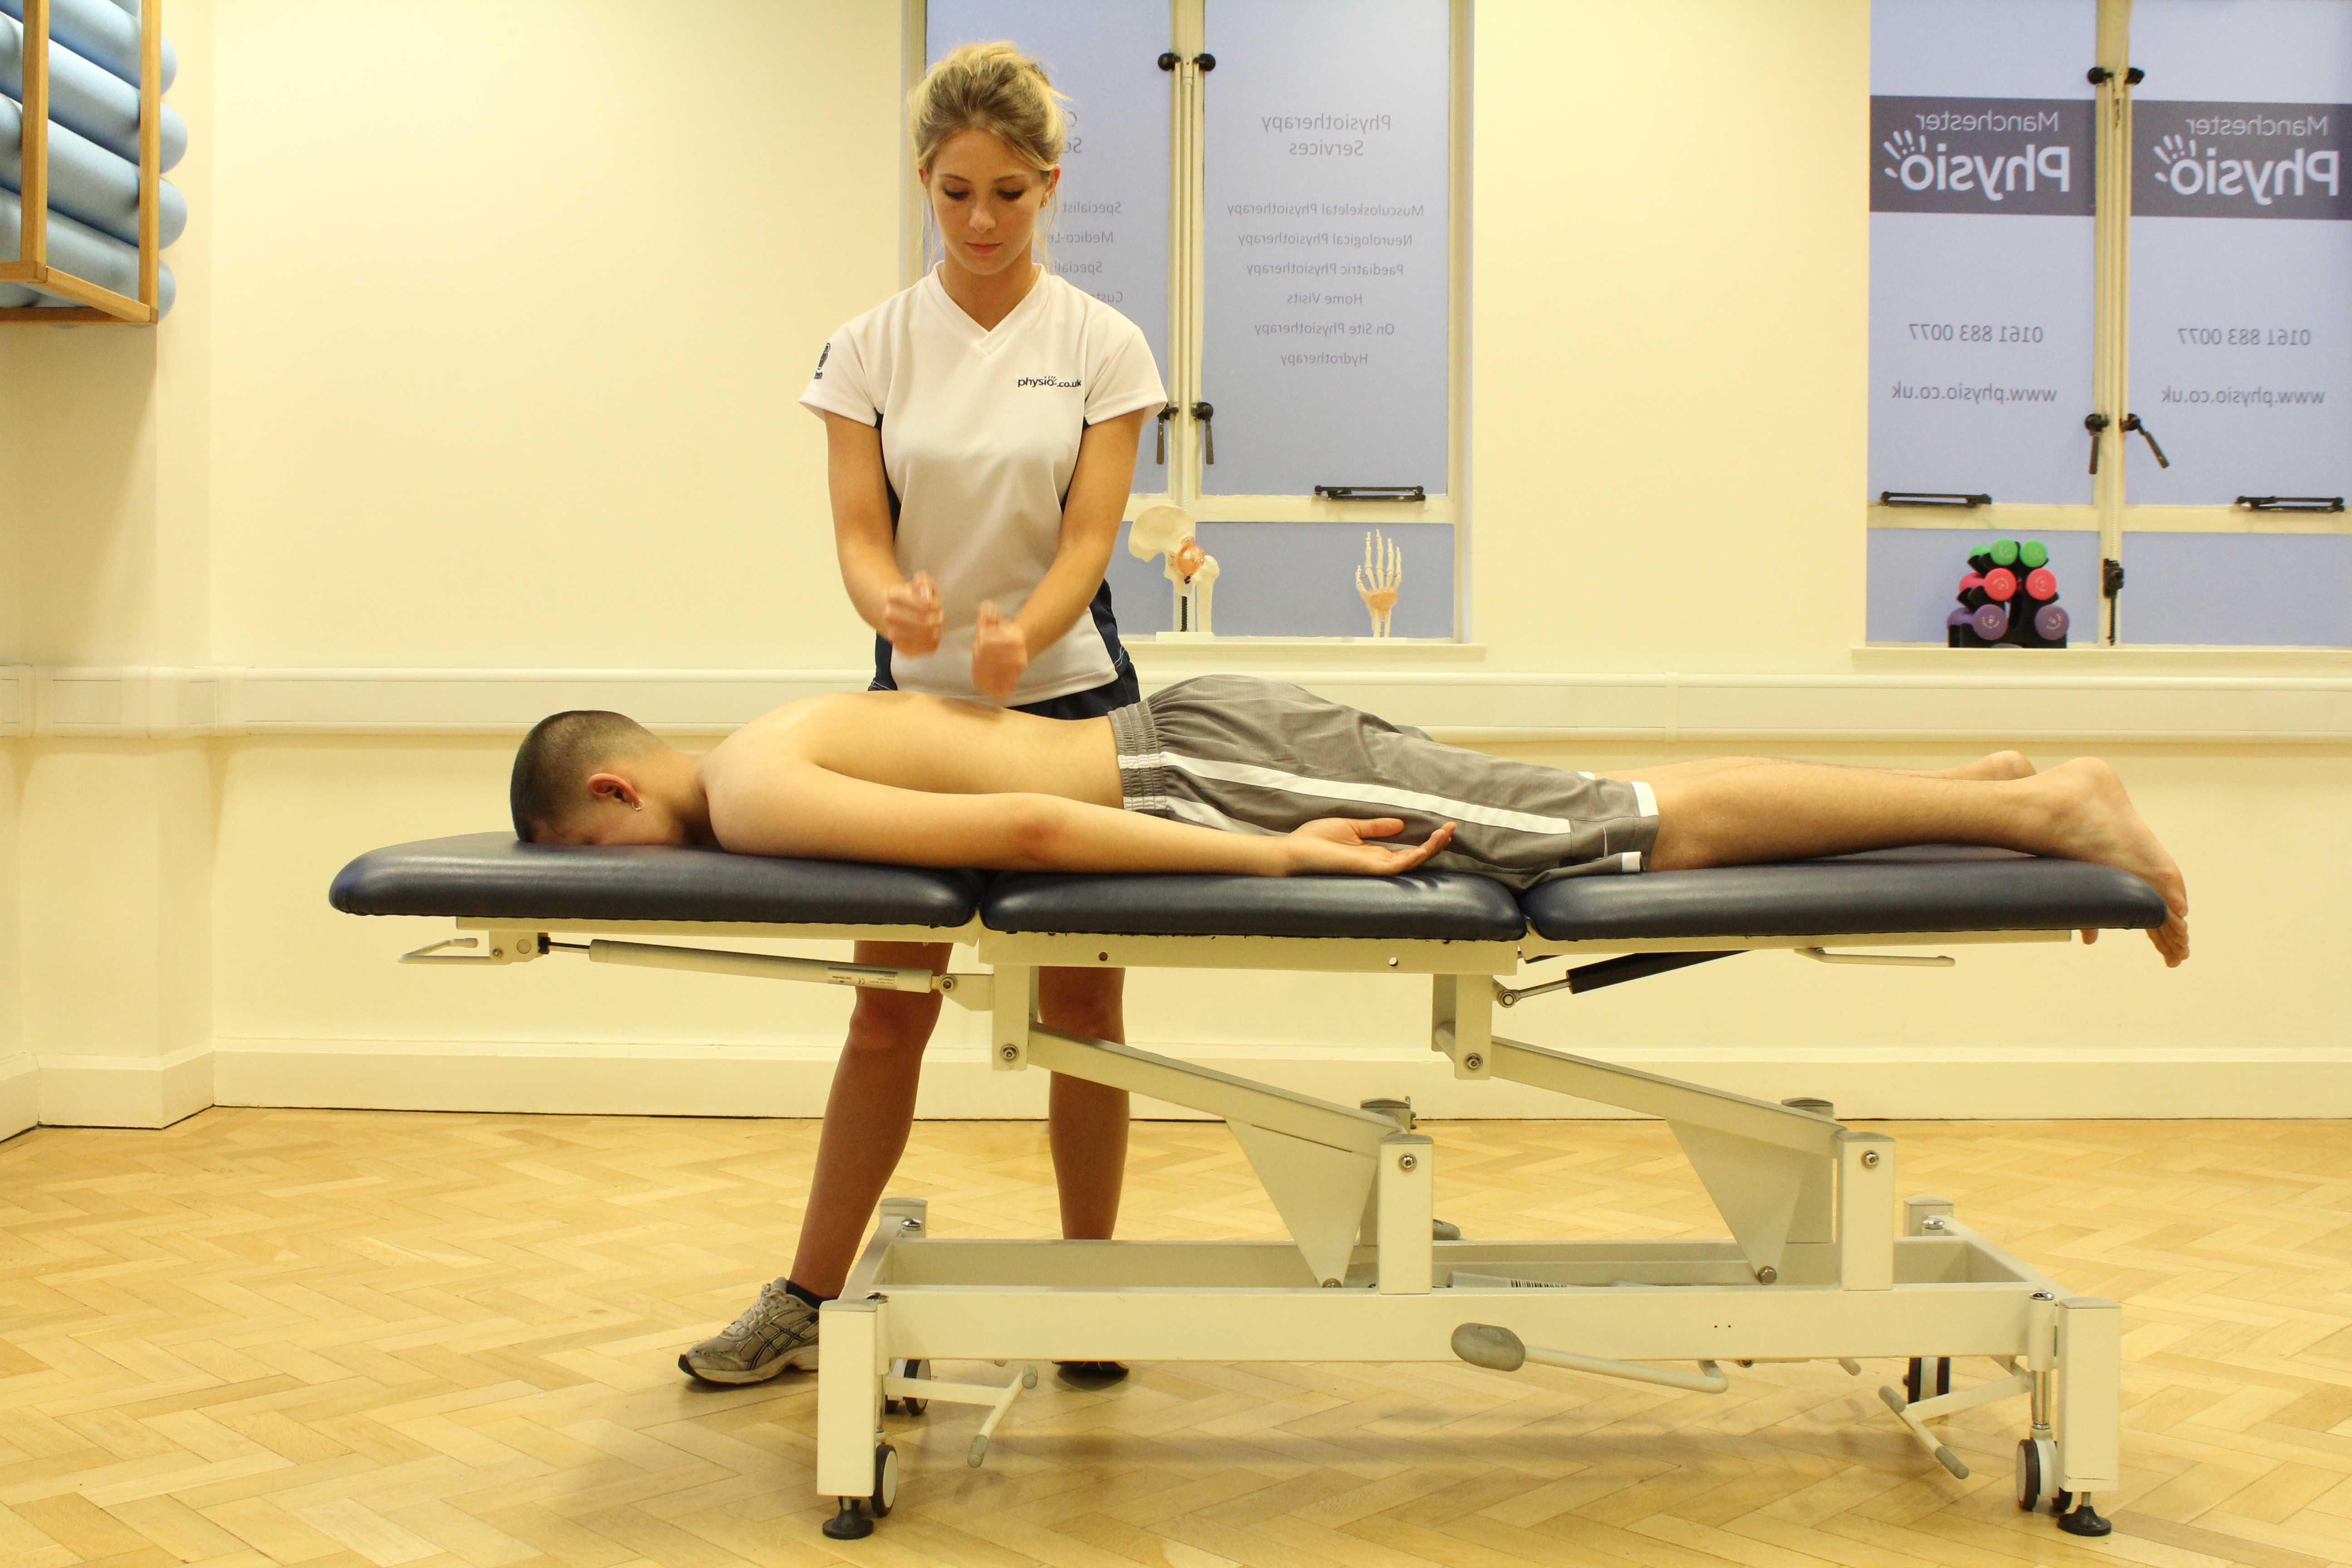 Percussion massage applied to the mid thoracic spine